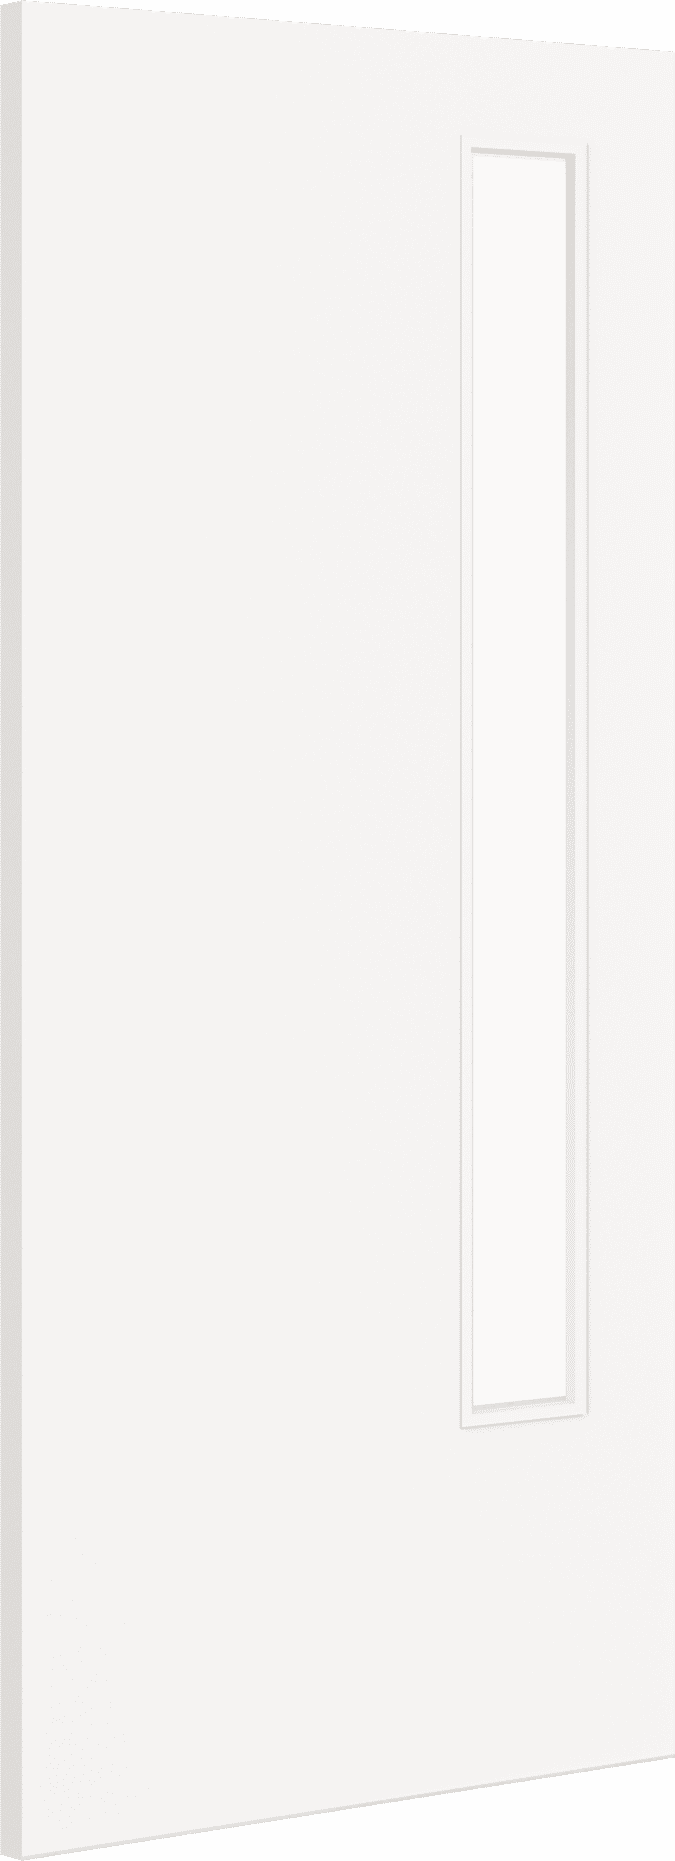 1981mm x 838mm x 44mm (33") Architectural Paint Grade White 13 Frosted Glazed Fire Door Blank